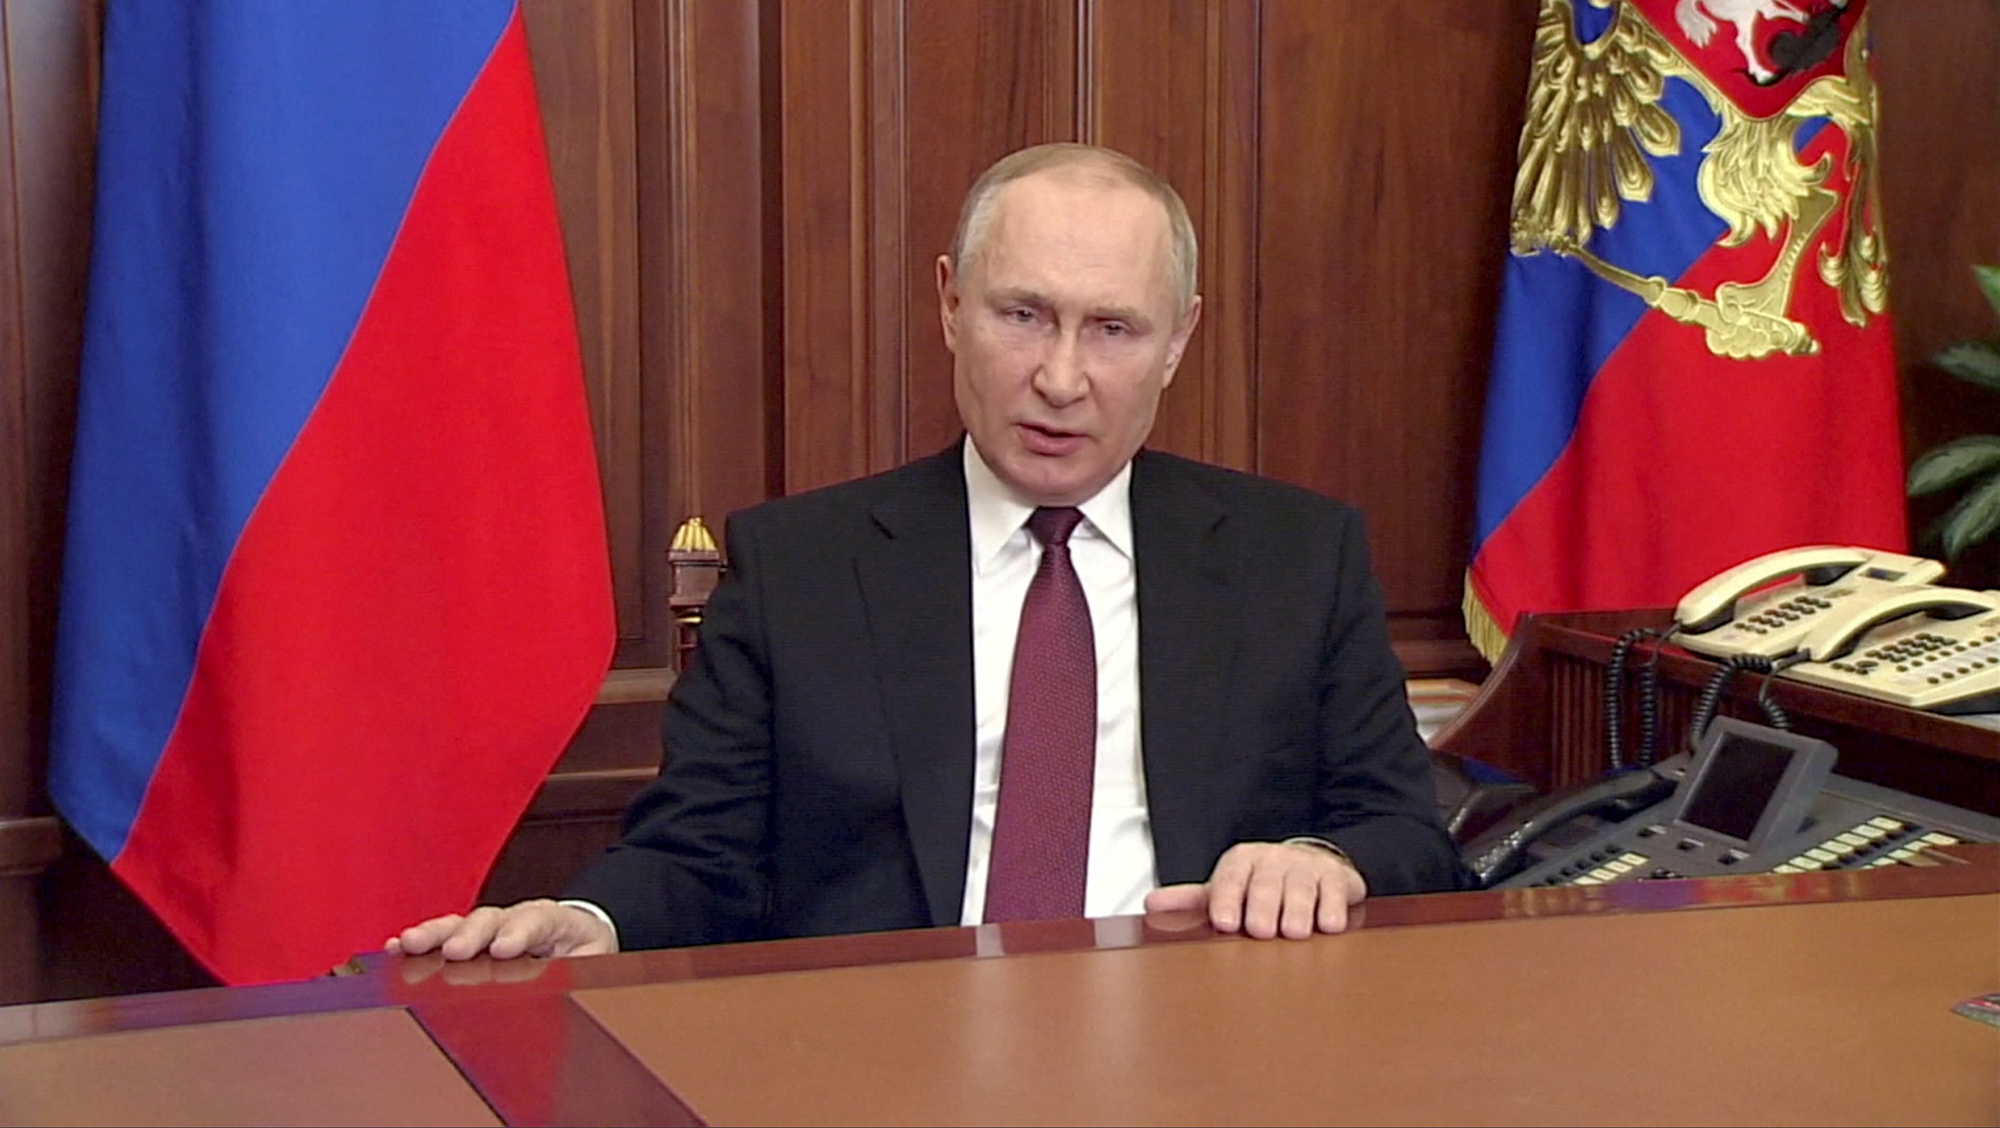 Russian President Vladimir Putin delivers a video address announcing the start of the military operation in eastern Ukraine, in Moscow, in a still image taken from video footage released February 24, 2022. 